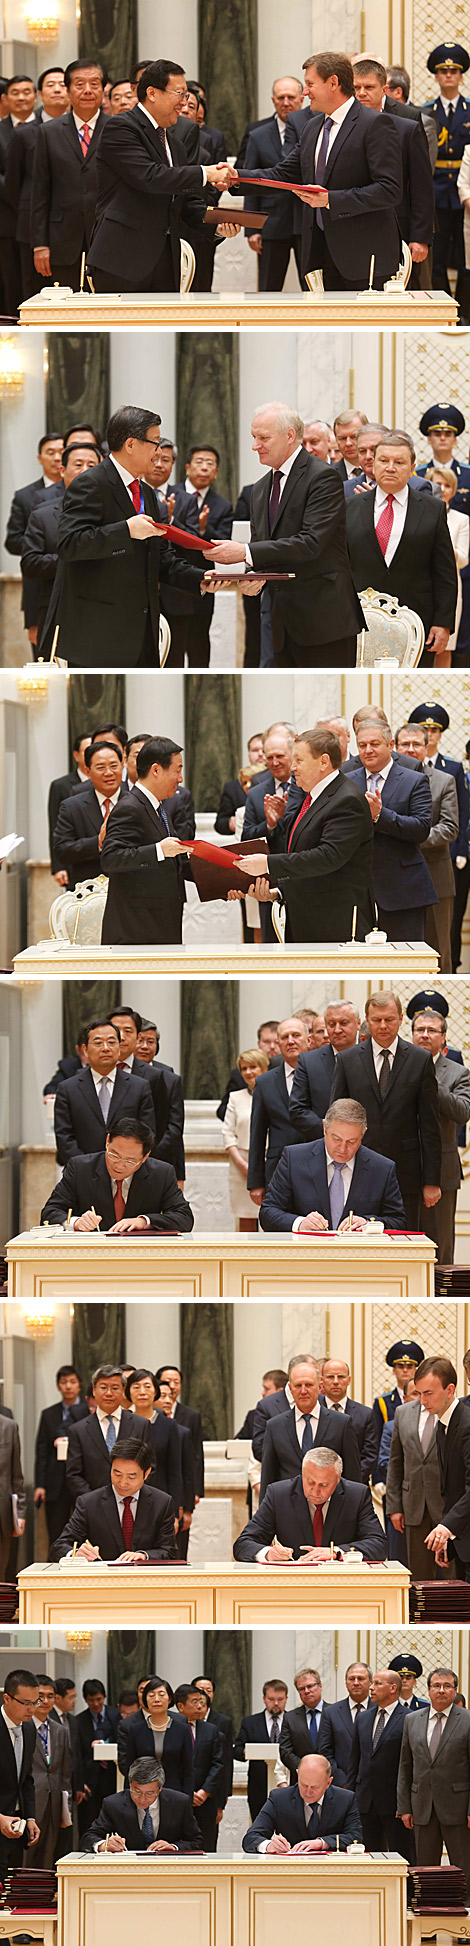 Belarus, China sign treaty of friendship and cooperation